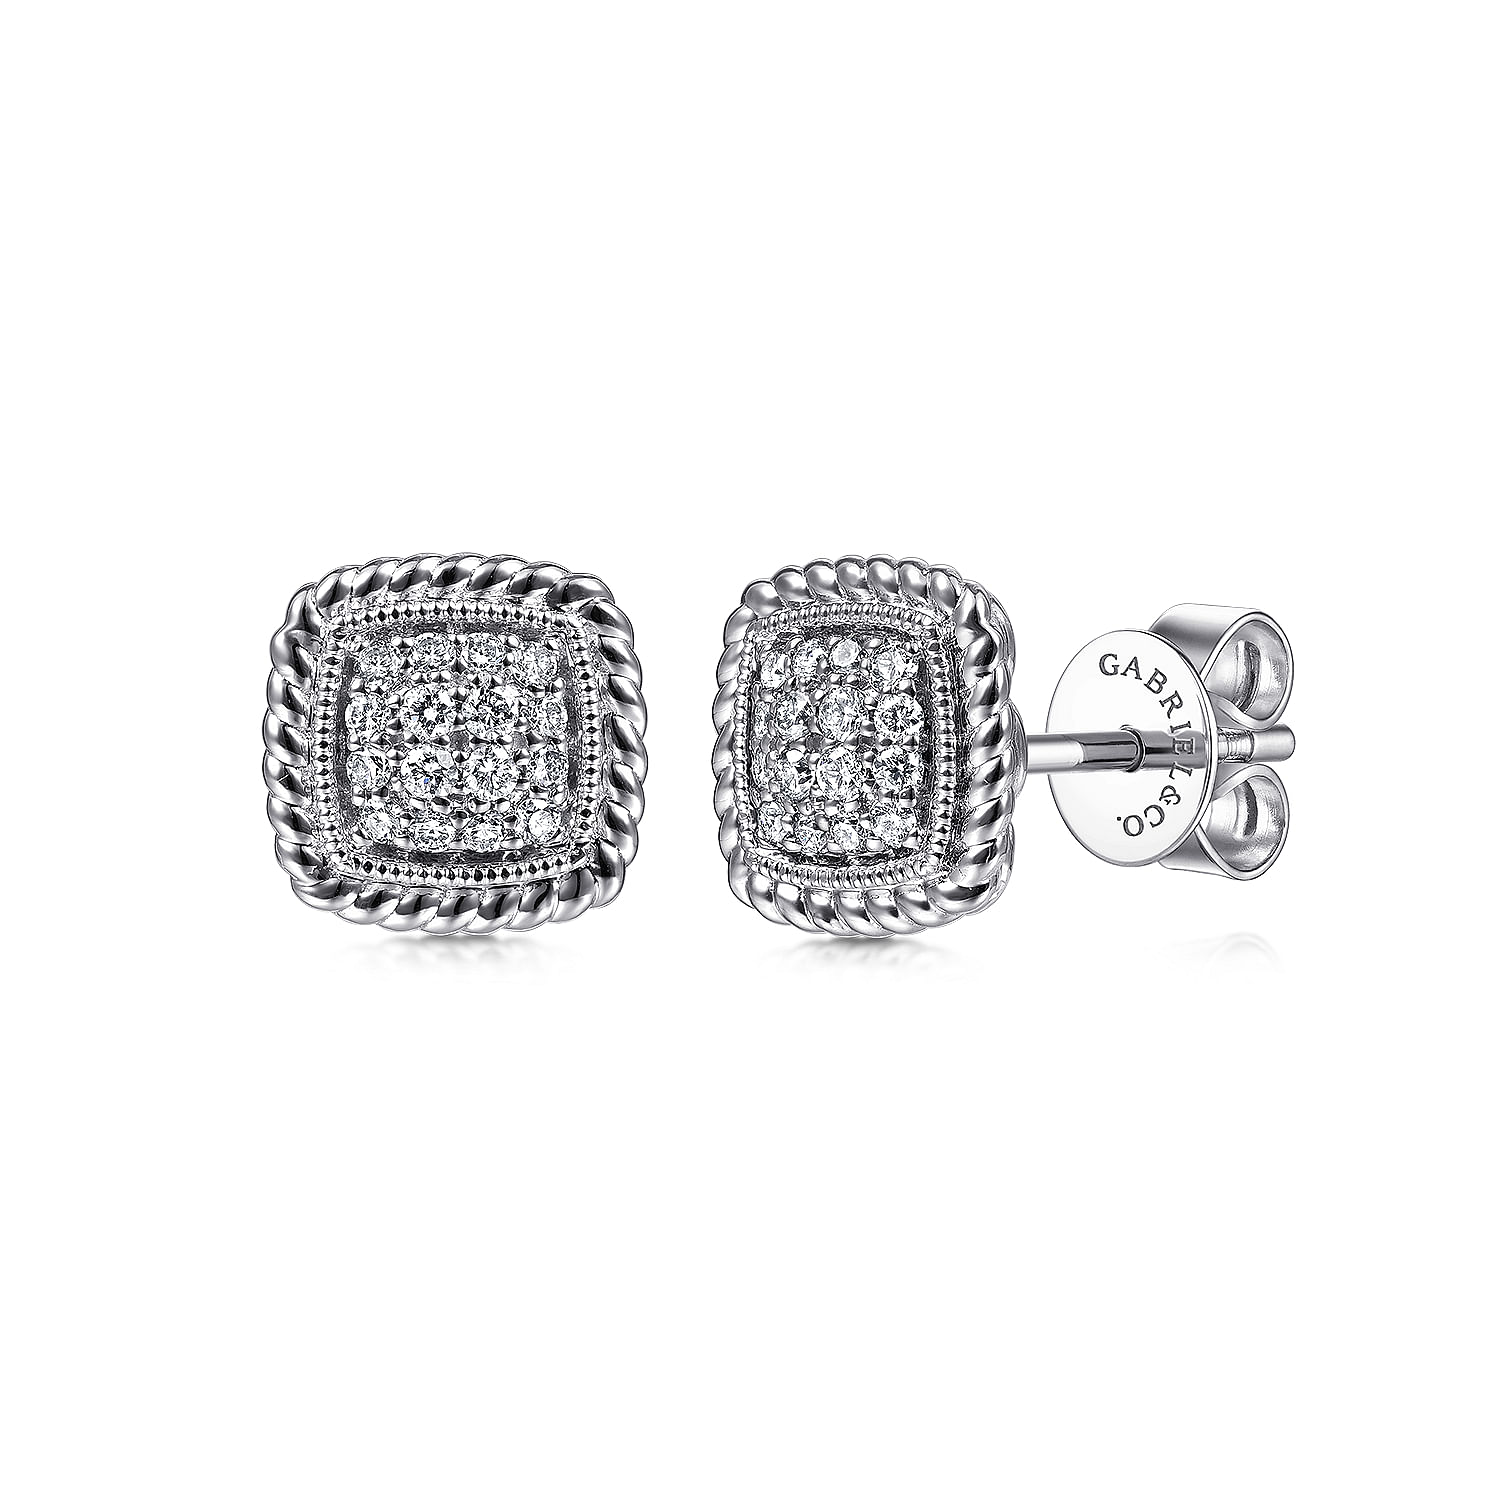 14K White Gold Pavé Diamond Stud Earrings with Twisted Rope Frame 